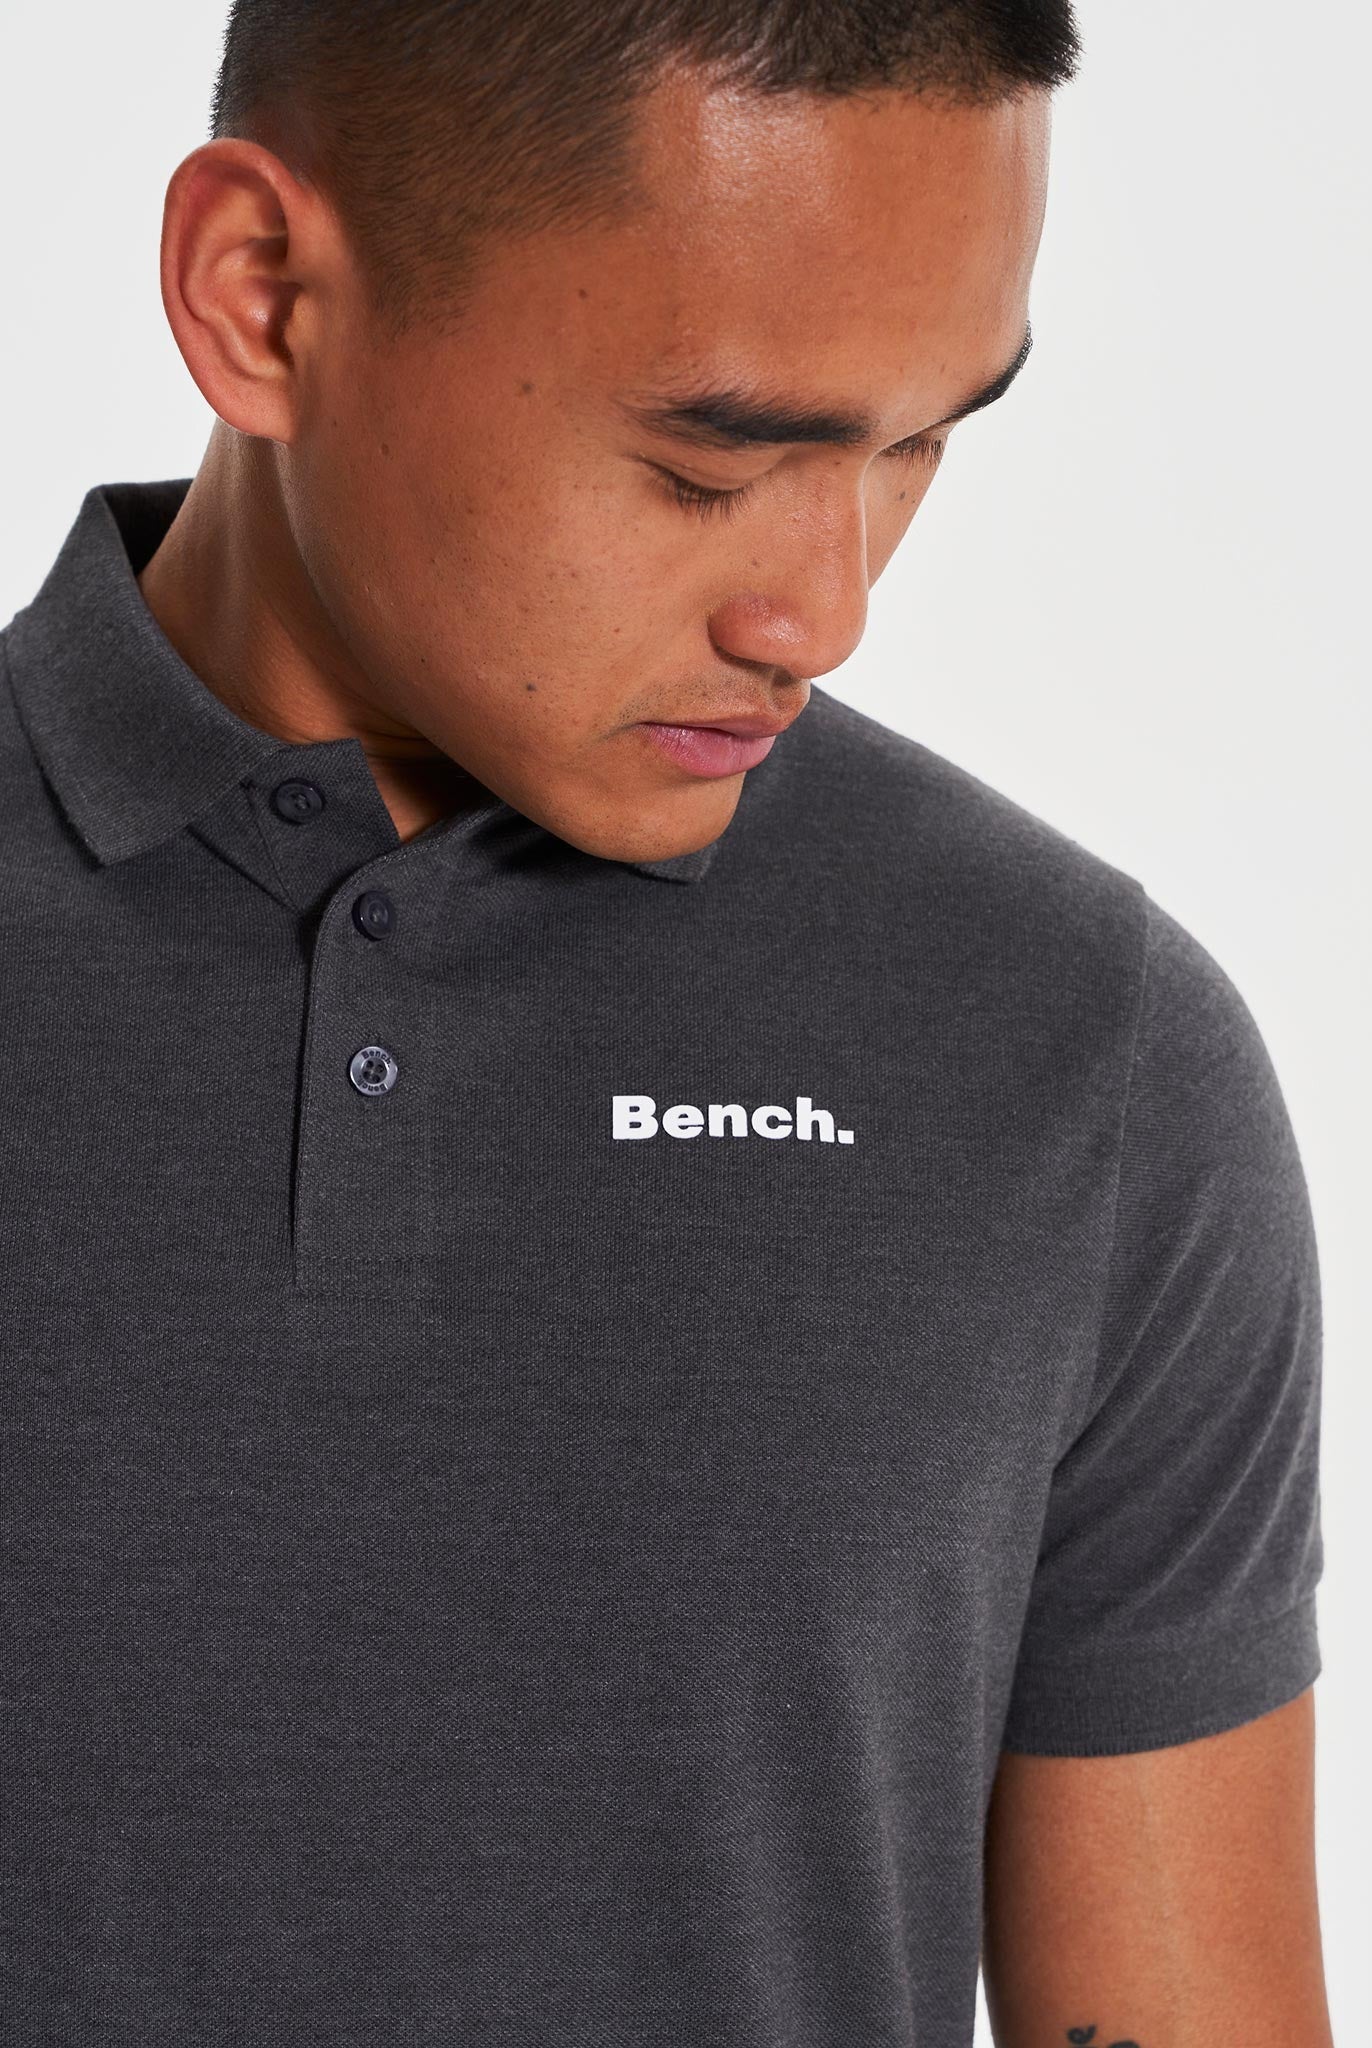 Mens 'BODE' 3 Pack Polos - ASSORTED - Shop at www.Bench.co.uk #LoveMyHood